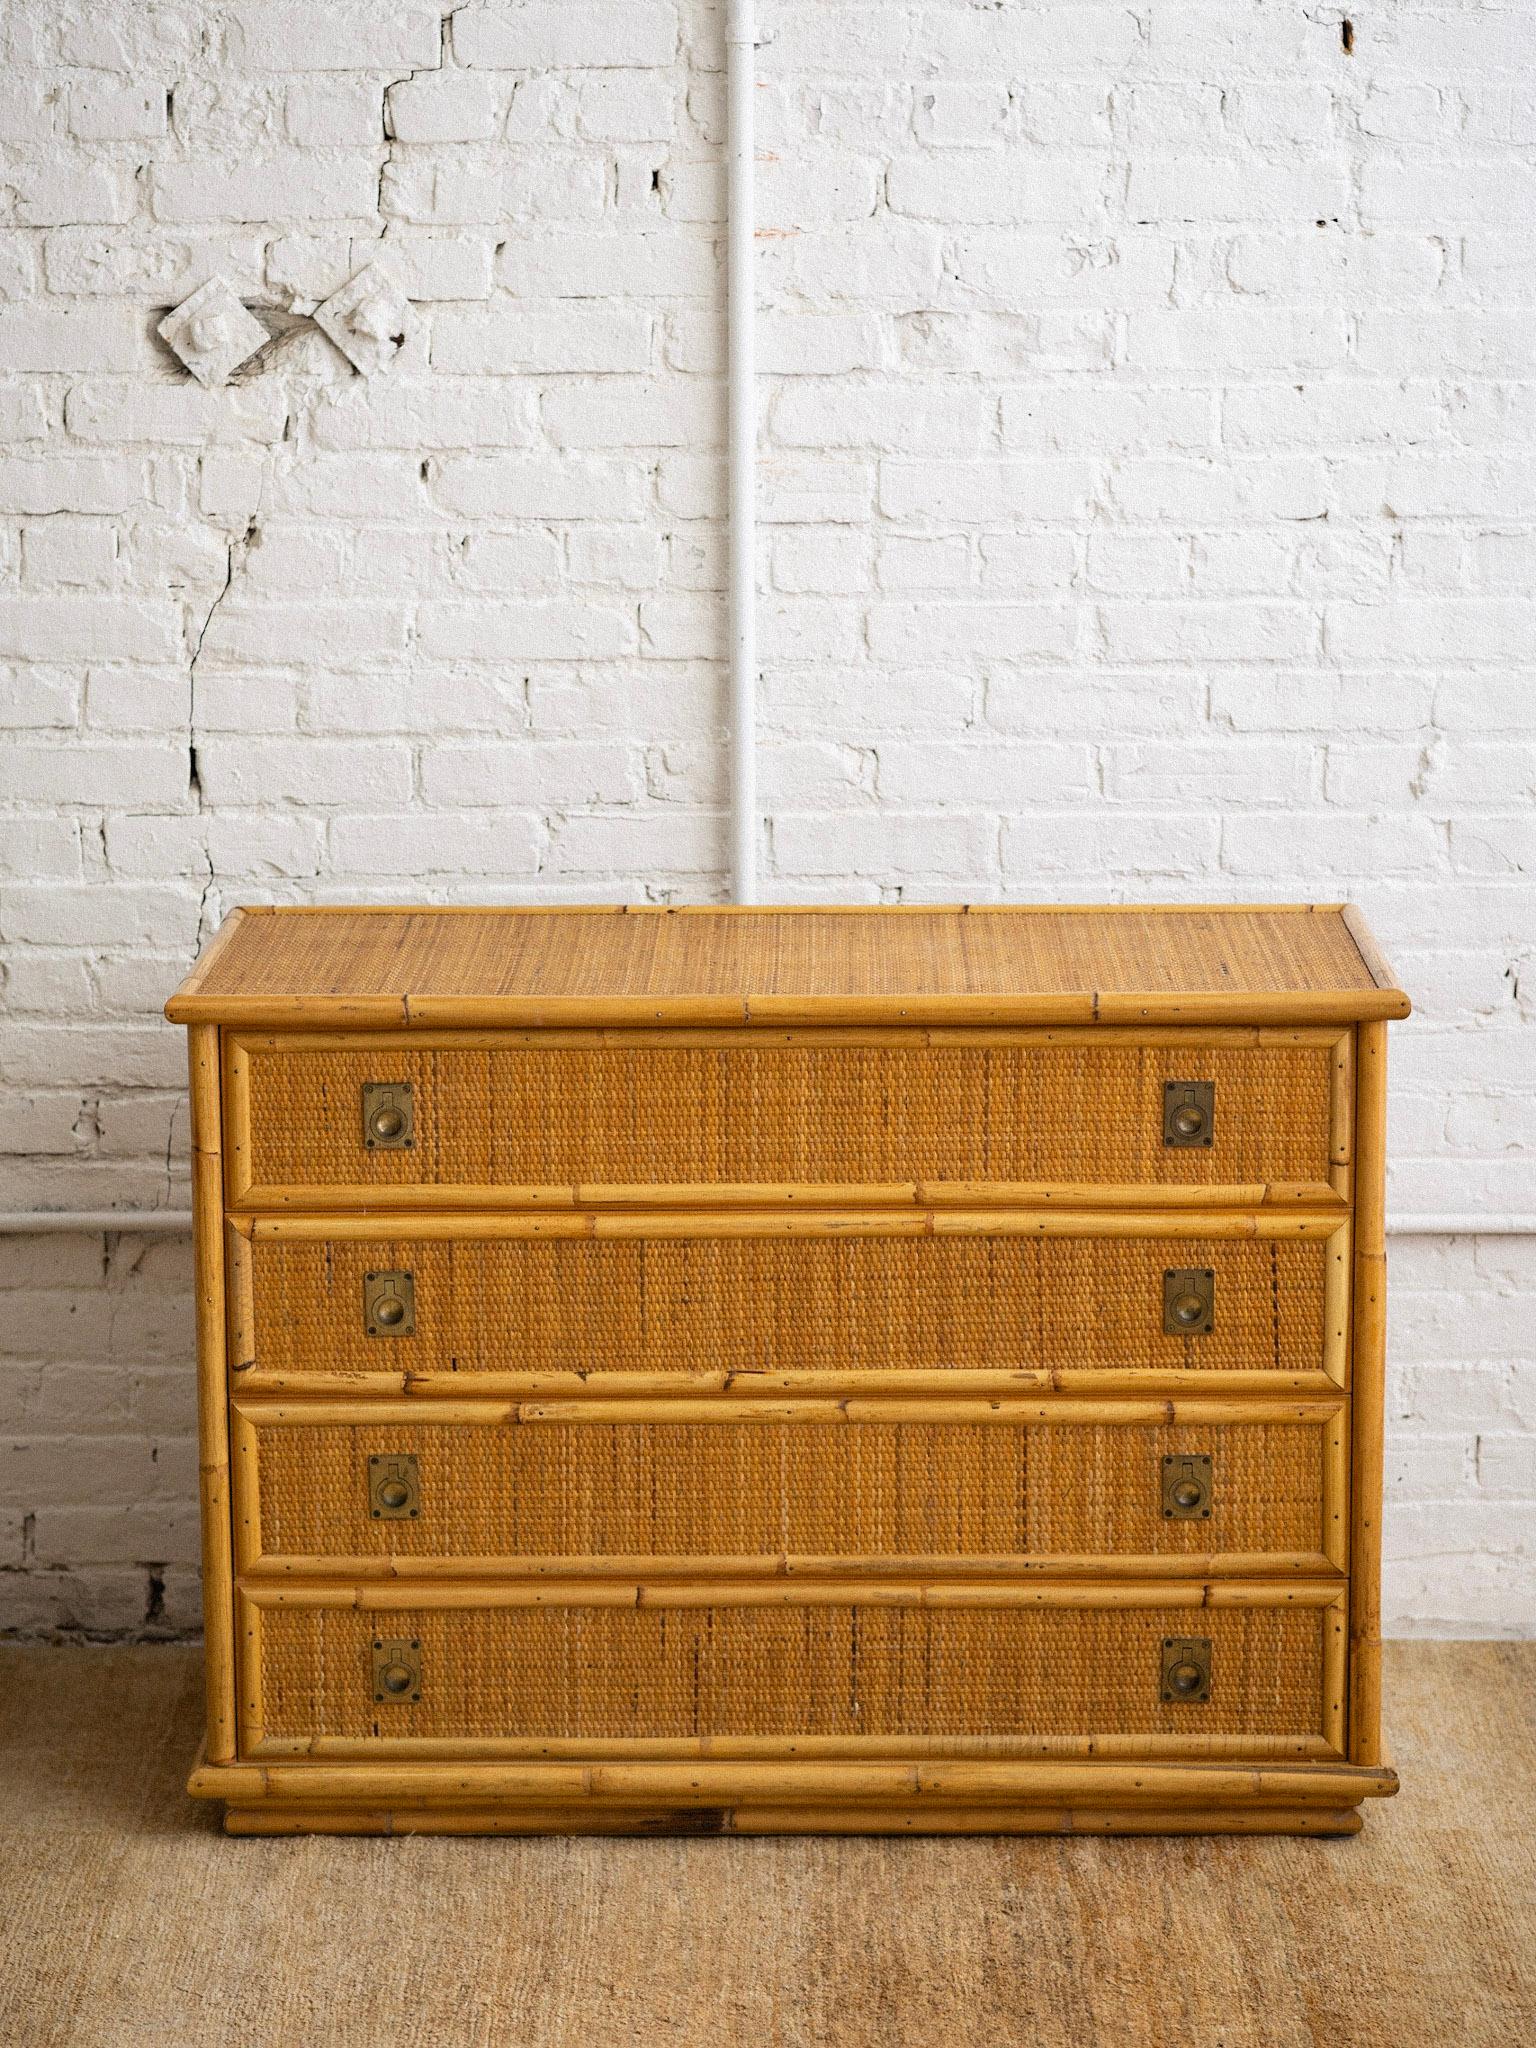 A rattan and cane four drawer dresser by Dal Vera. Brass campaign style pulls. Sourced in Northern Italy.